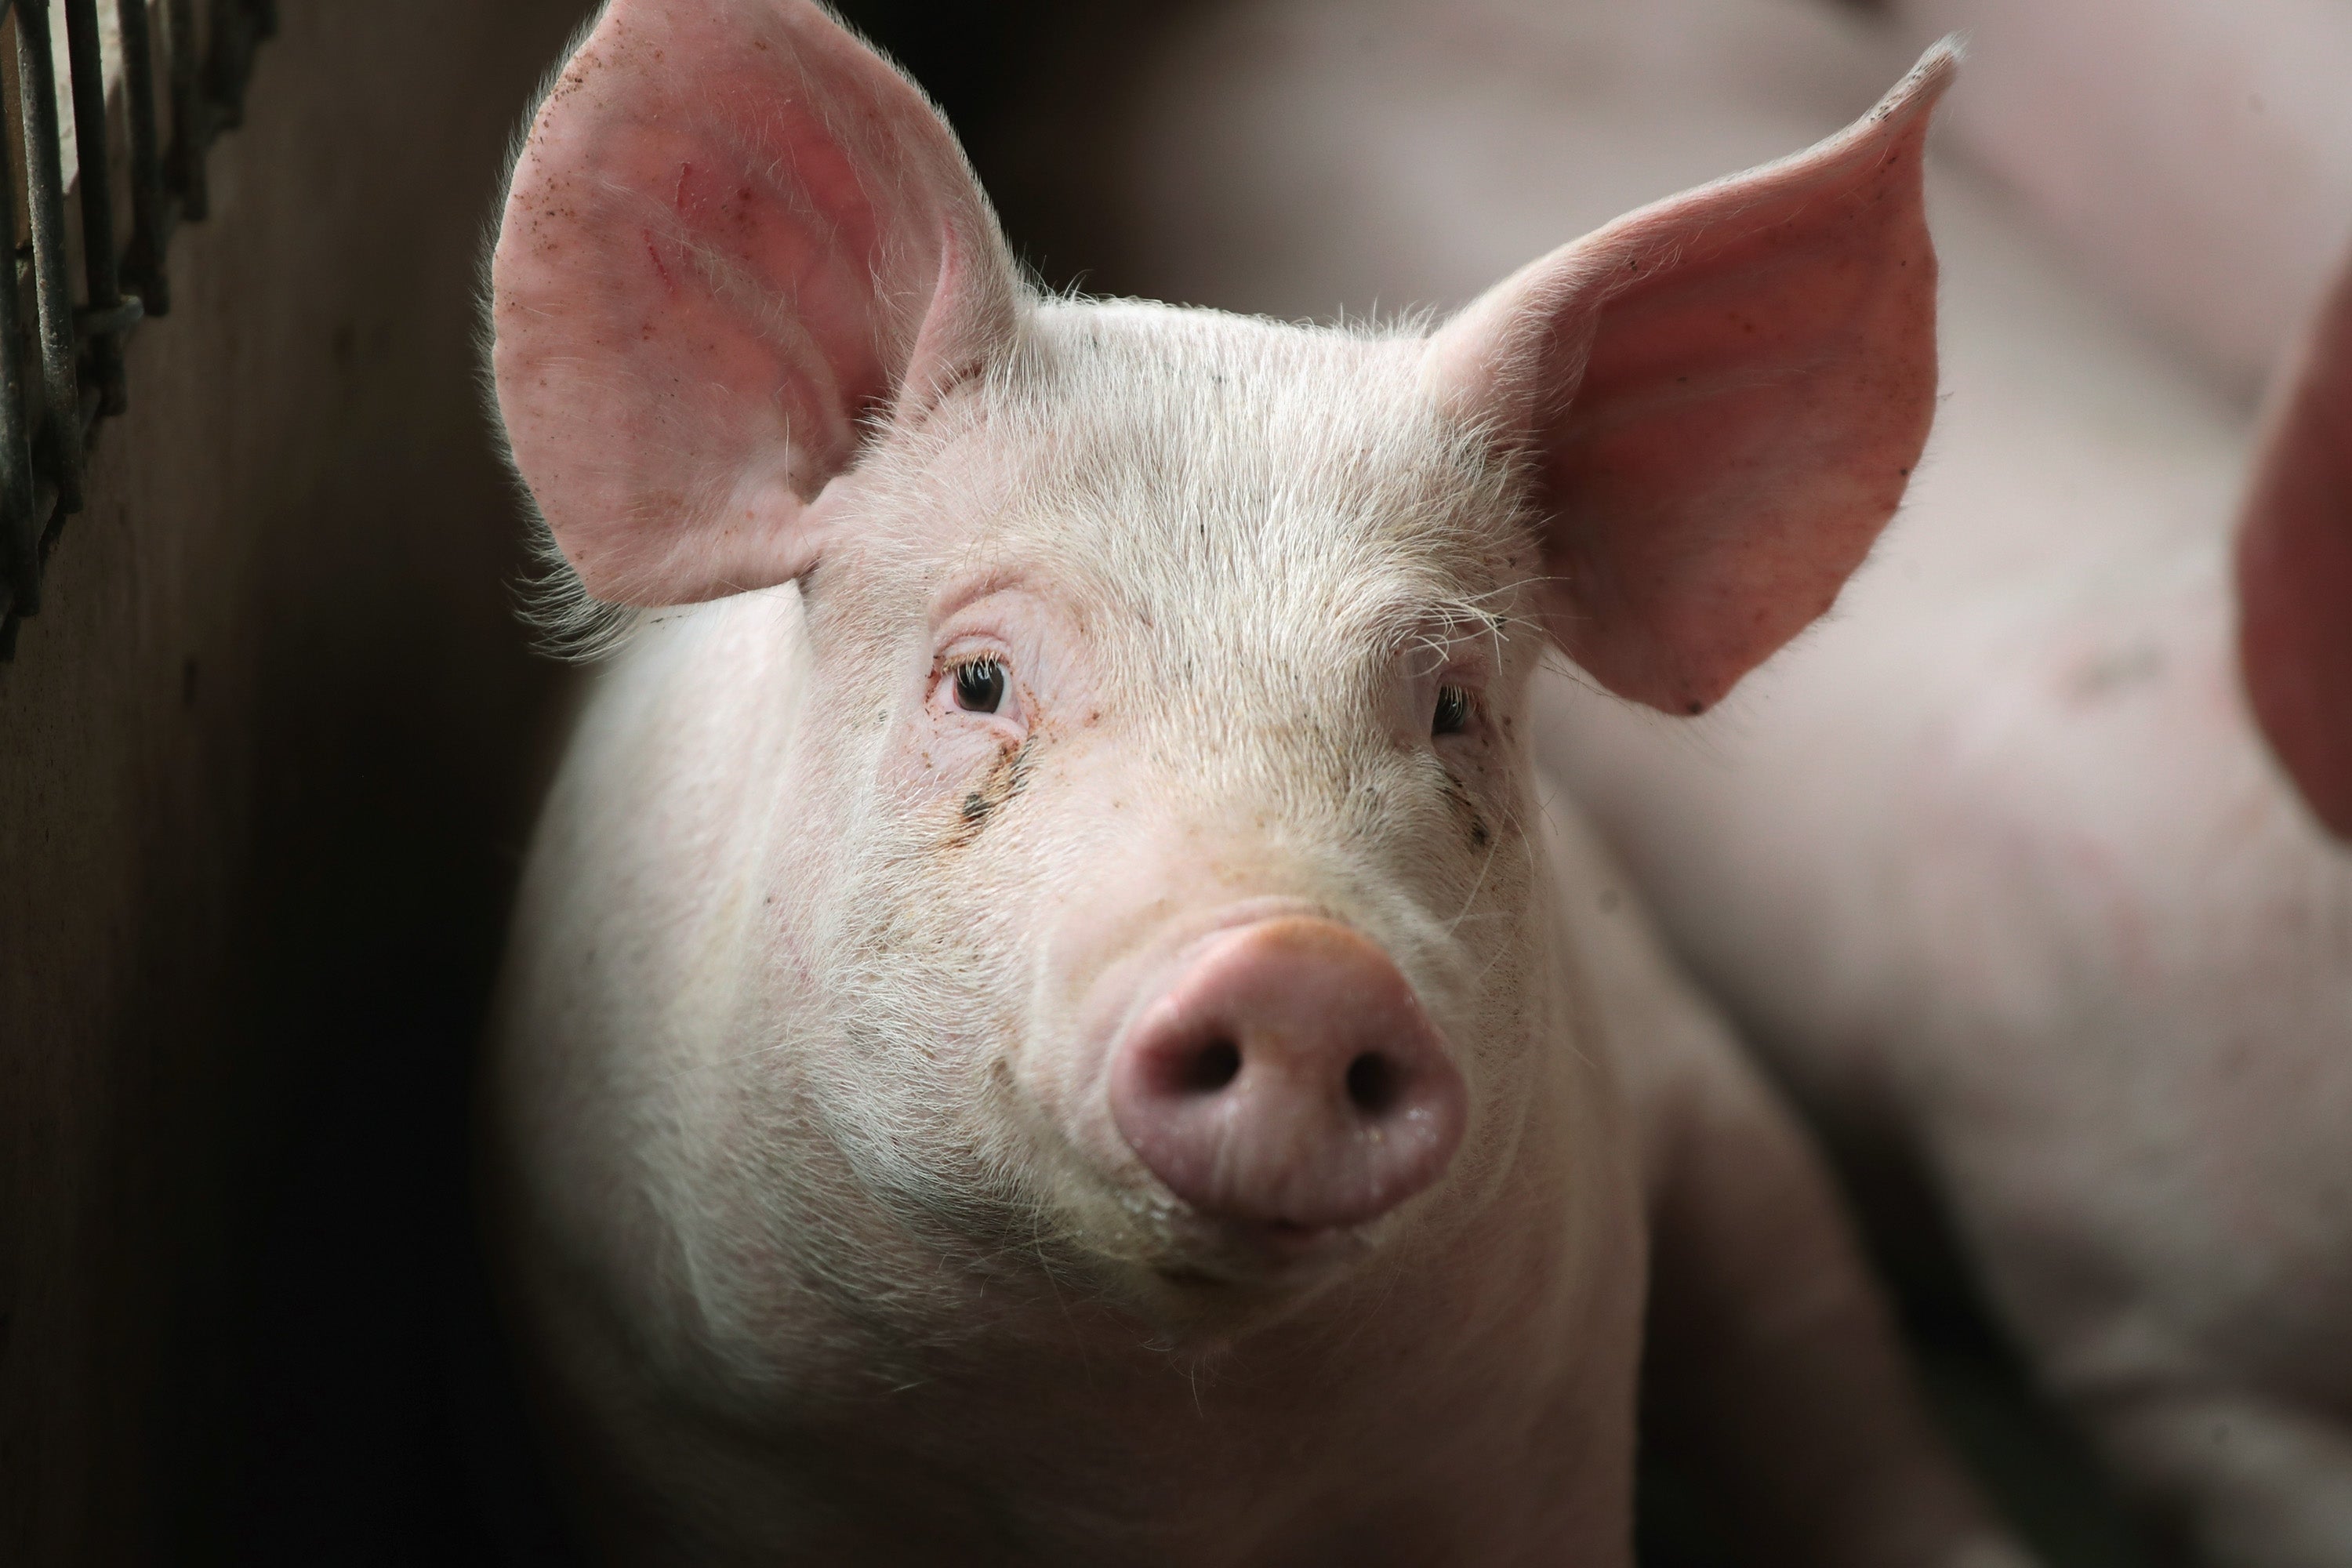 A Warming Climate Could Make Pigs Produce Less Meat - Scientific American